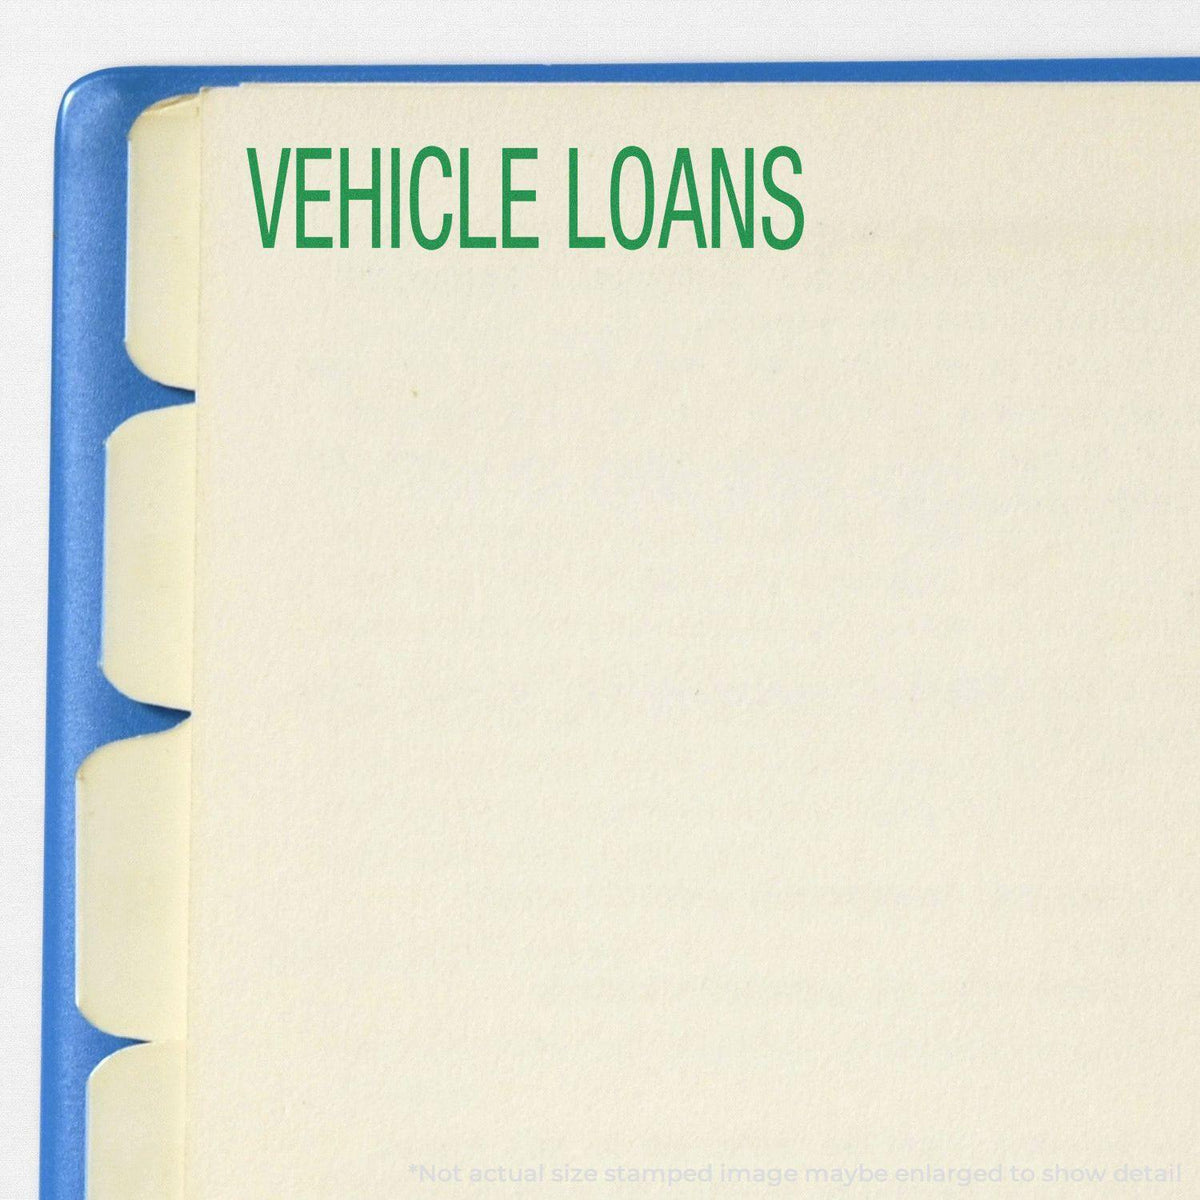 In Use Vehicle Loans Rubber Stamp Image